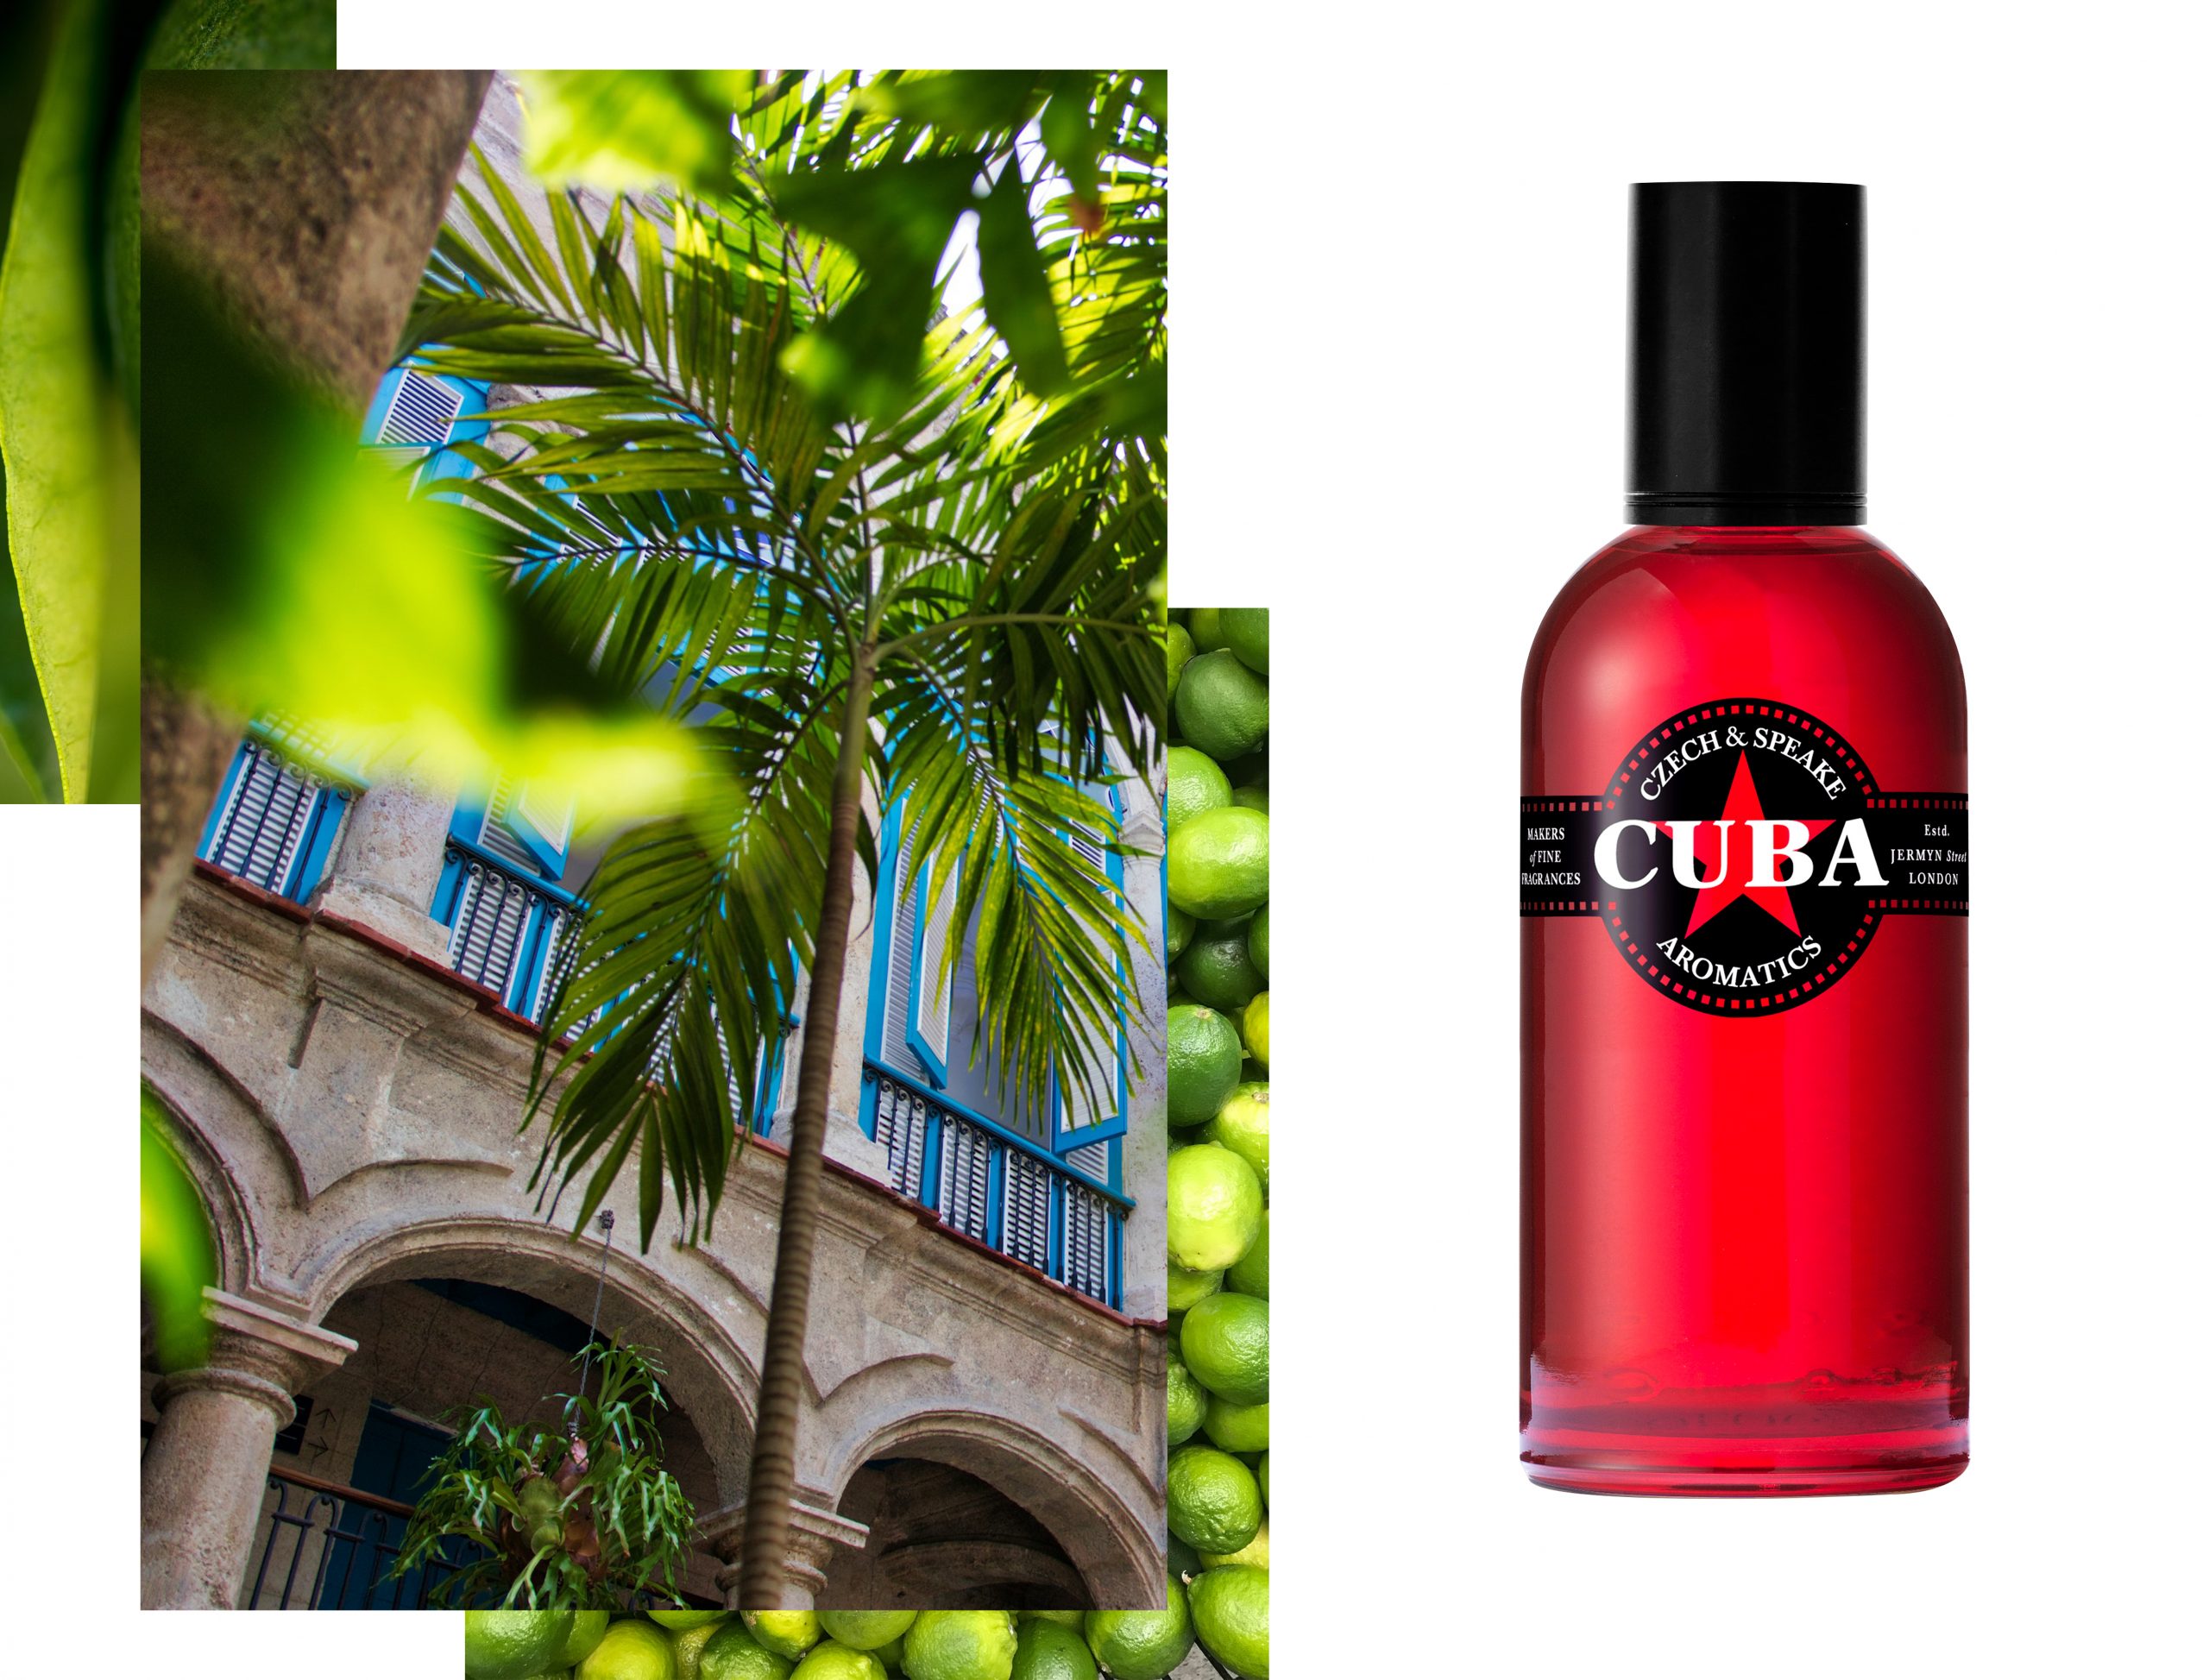 Cuba 100ml fragrance with cuban architecture, palm trees, limes